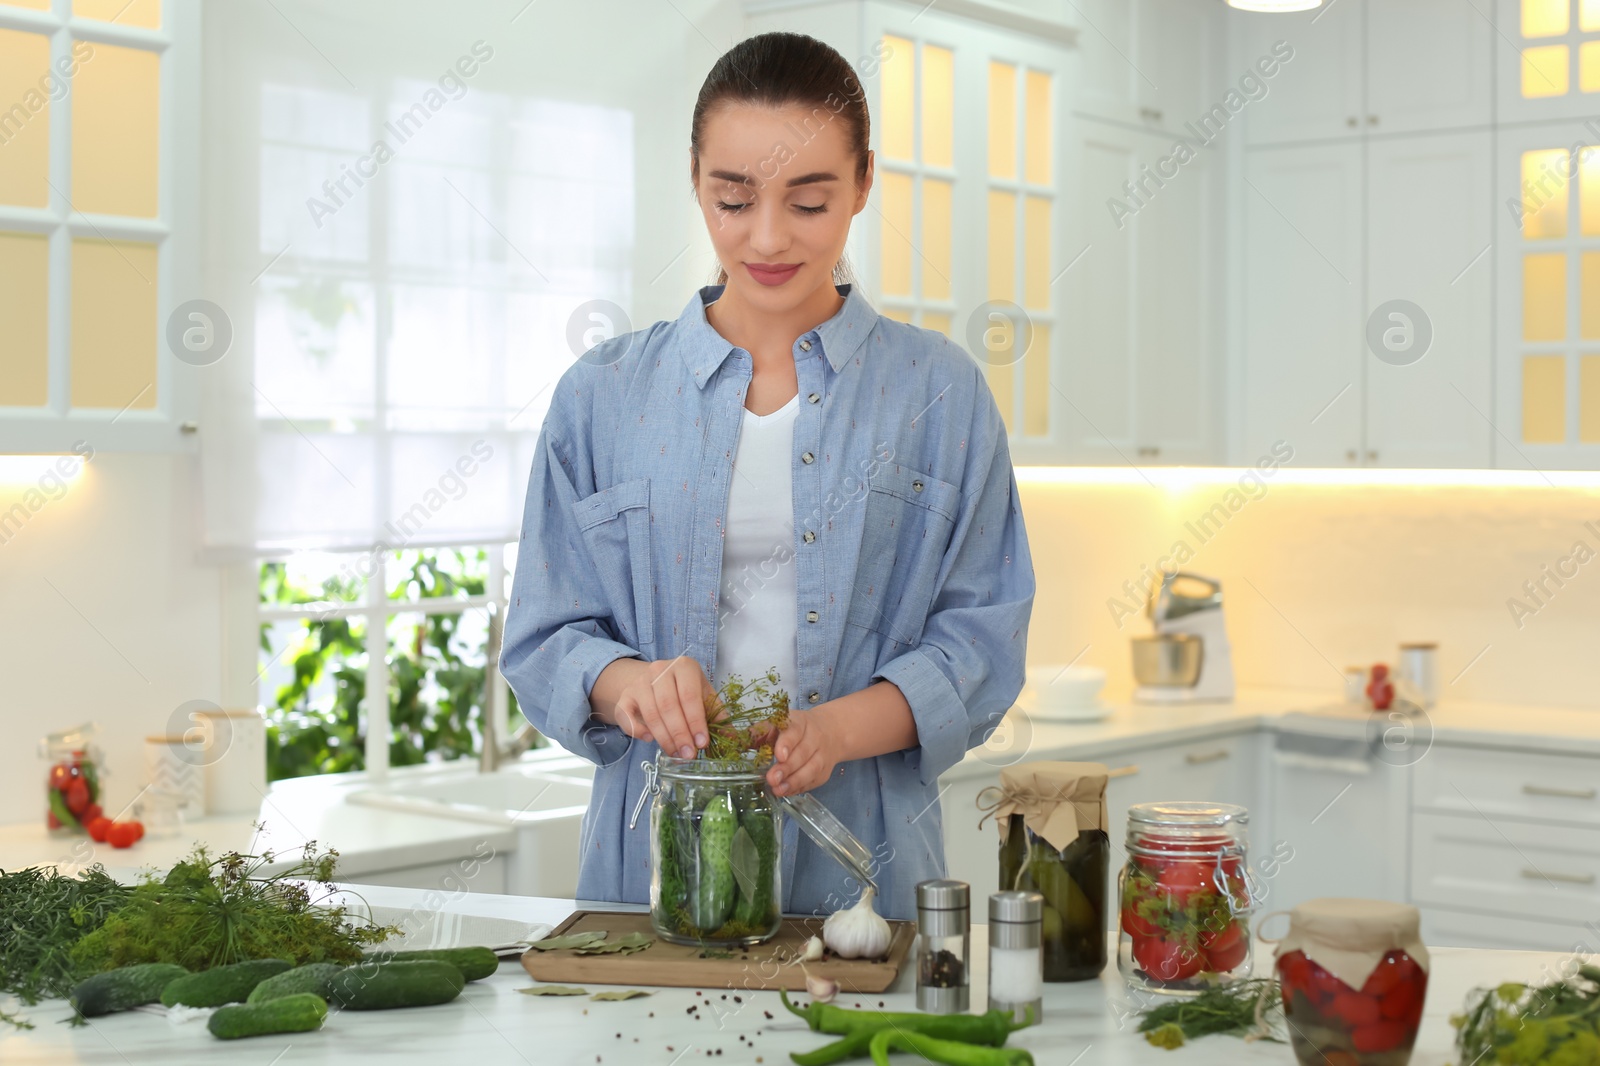 Photo of Woman putting dill into pickling jar at table in kitchen